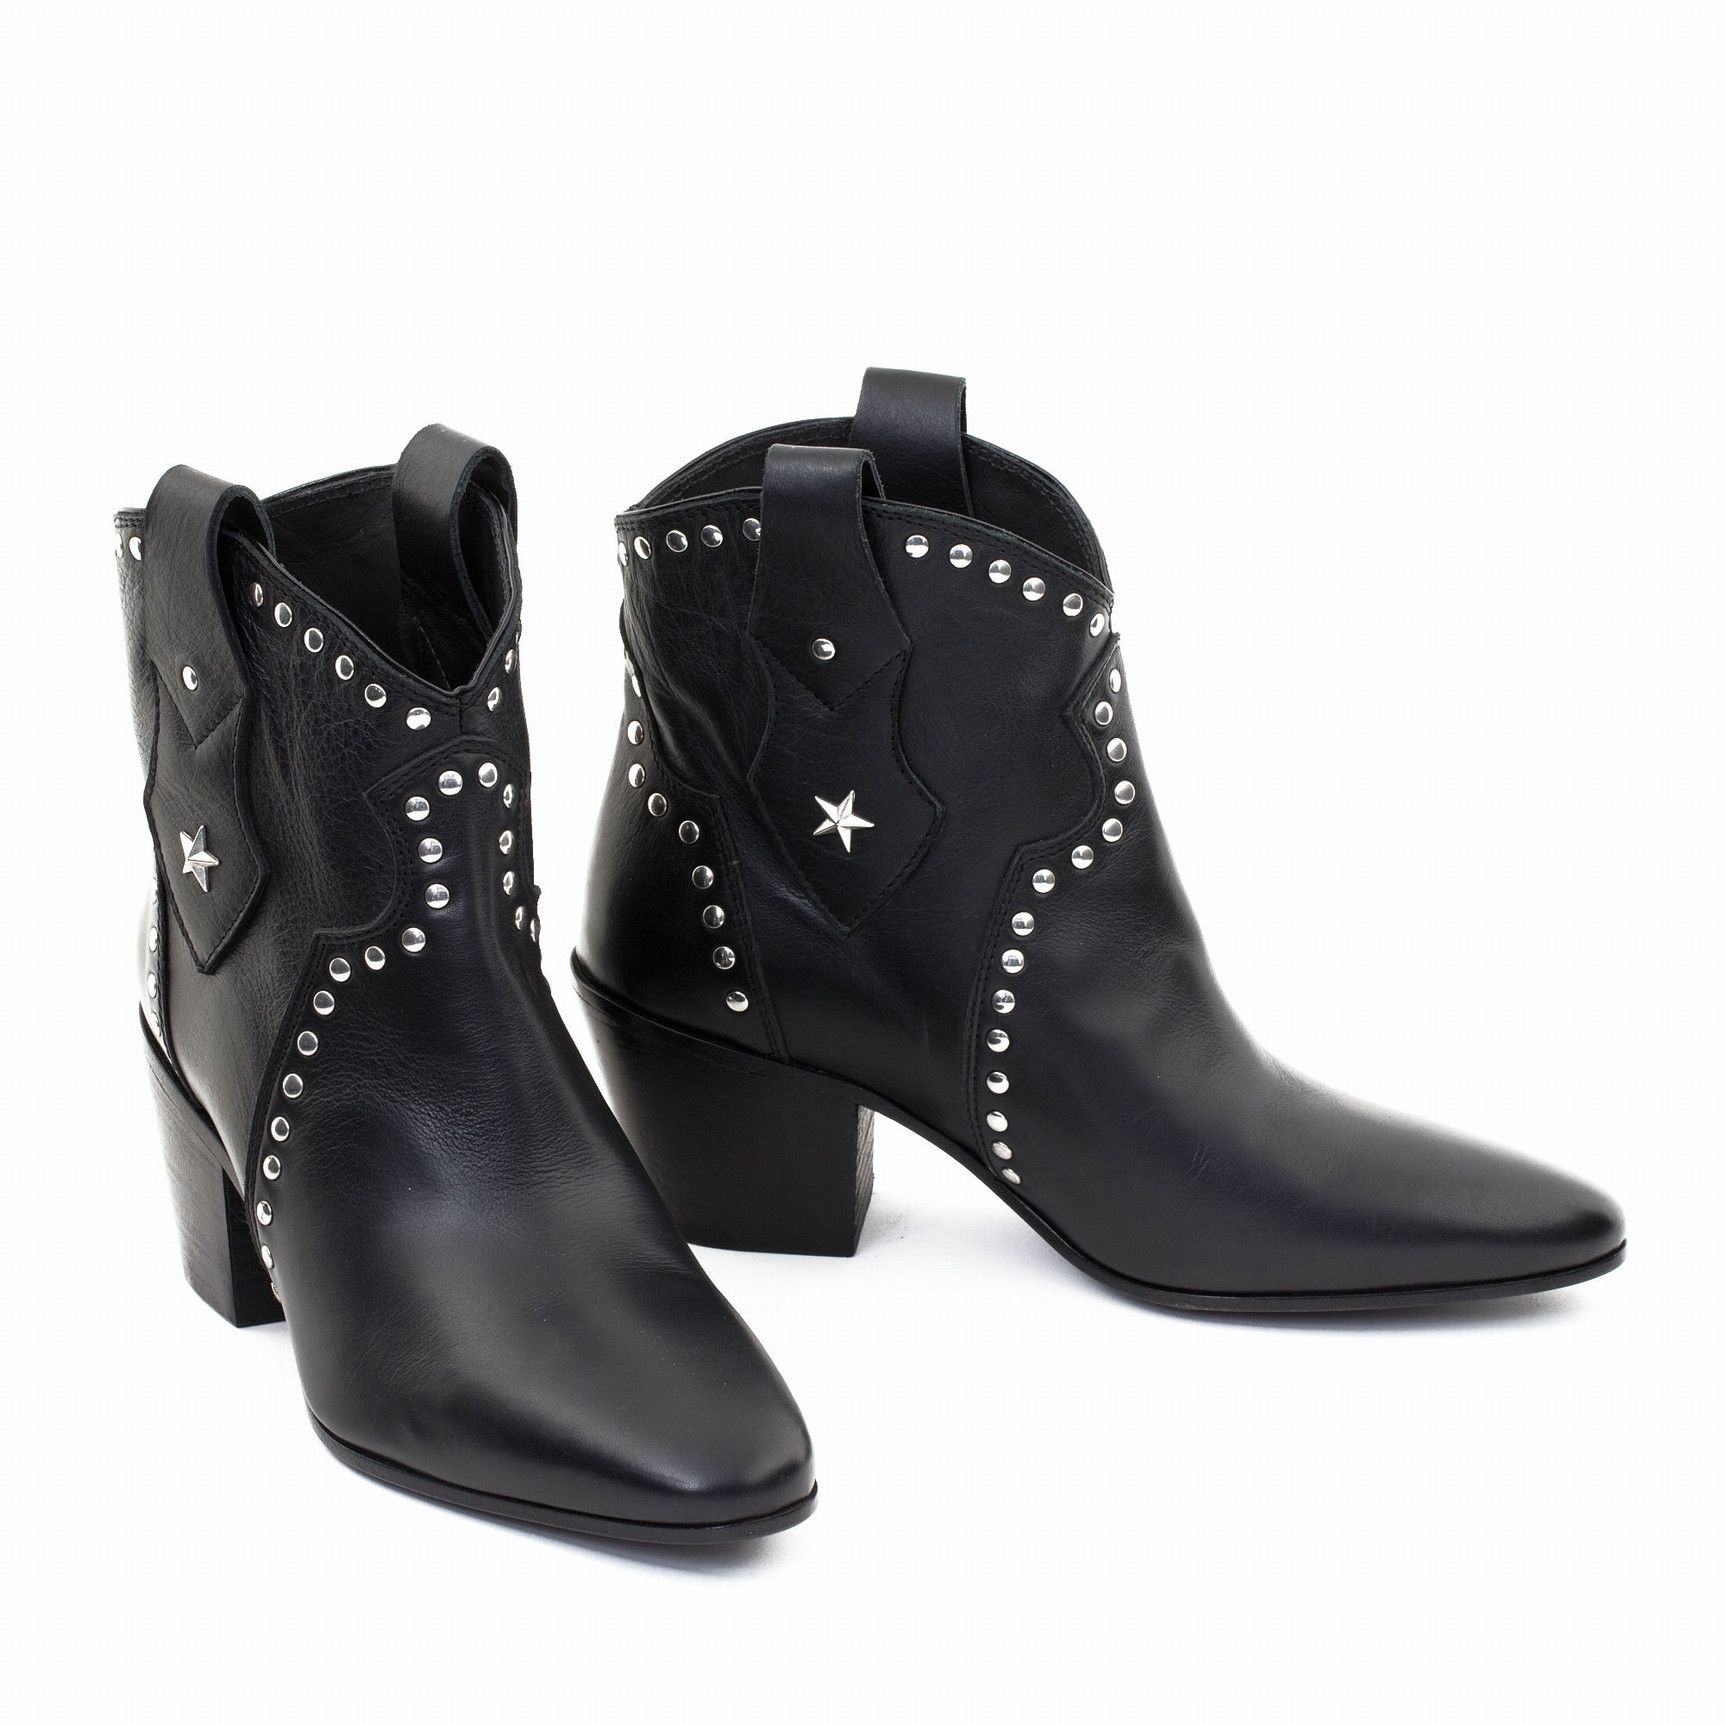 YAMA BUFFALO BLACK SQUARED TOE ANKLE BOOTS   WITH STUDS   Total heel height 2.8 Inches  Color black  Leather sole  Leather heel 